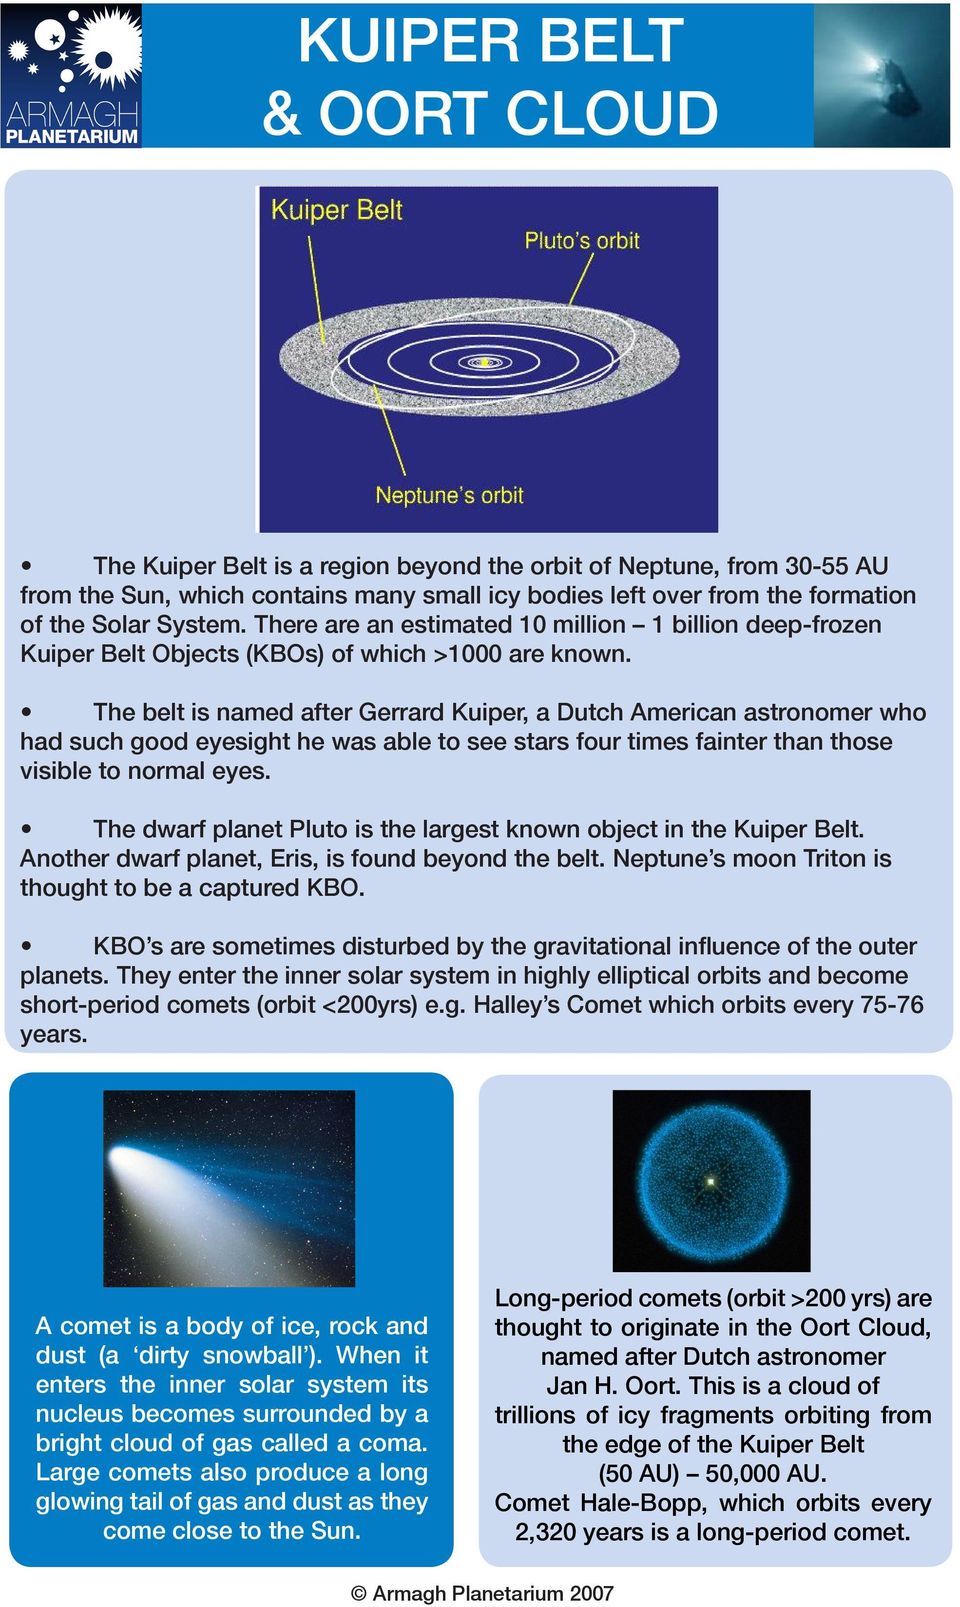 The belt is named after Gerrard Kuiper, a Dutch American astronomer who had such good eyesight he was able to see stars four times fainter than those visible to normal eyes.